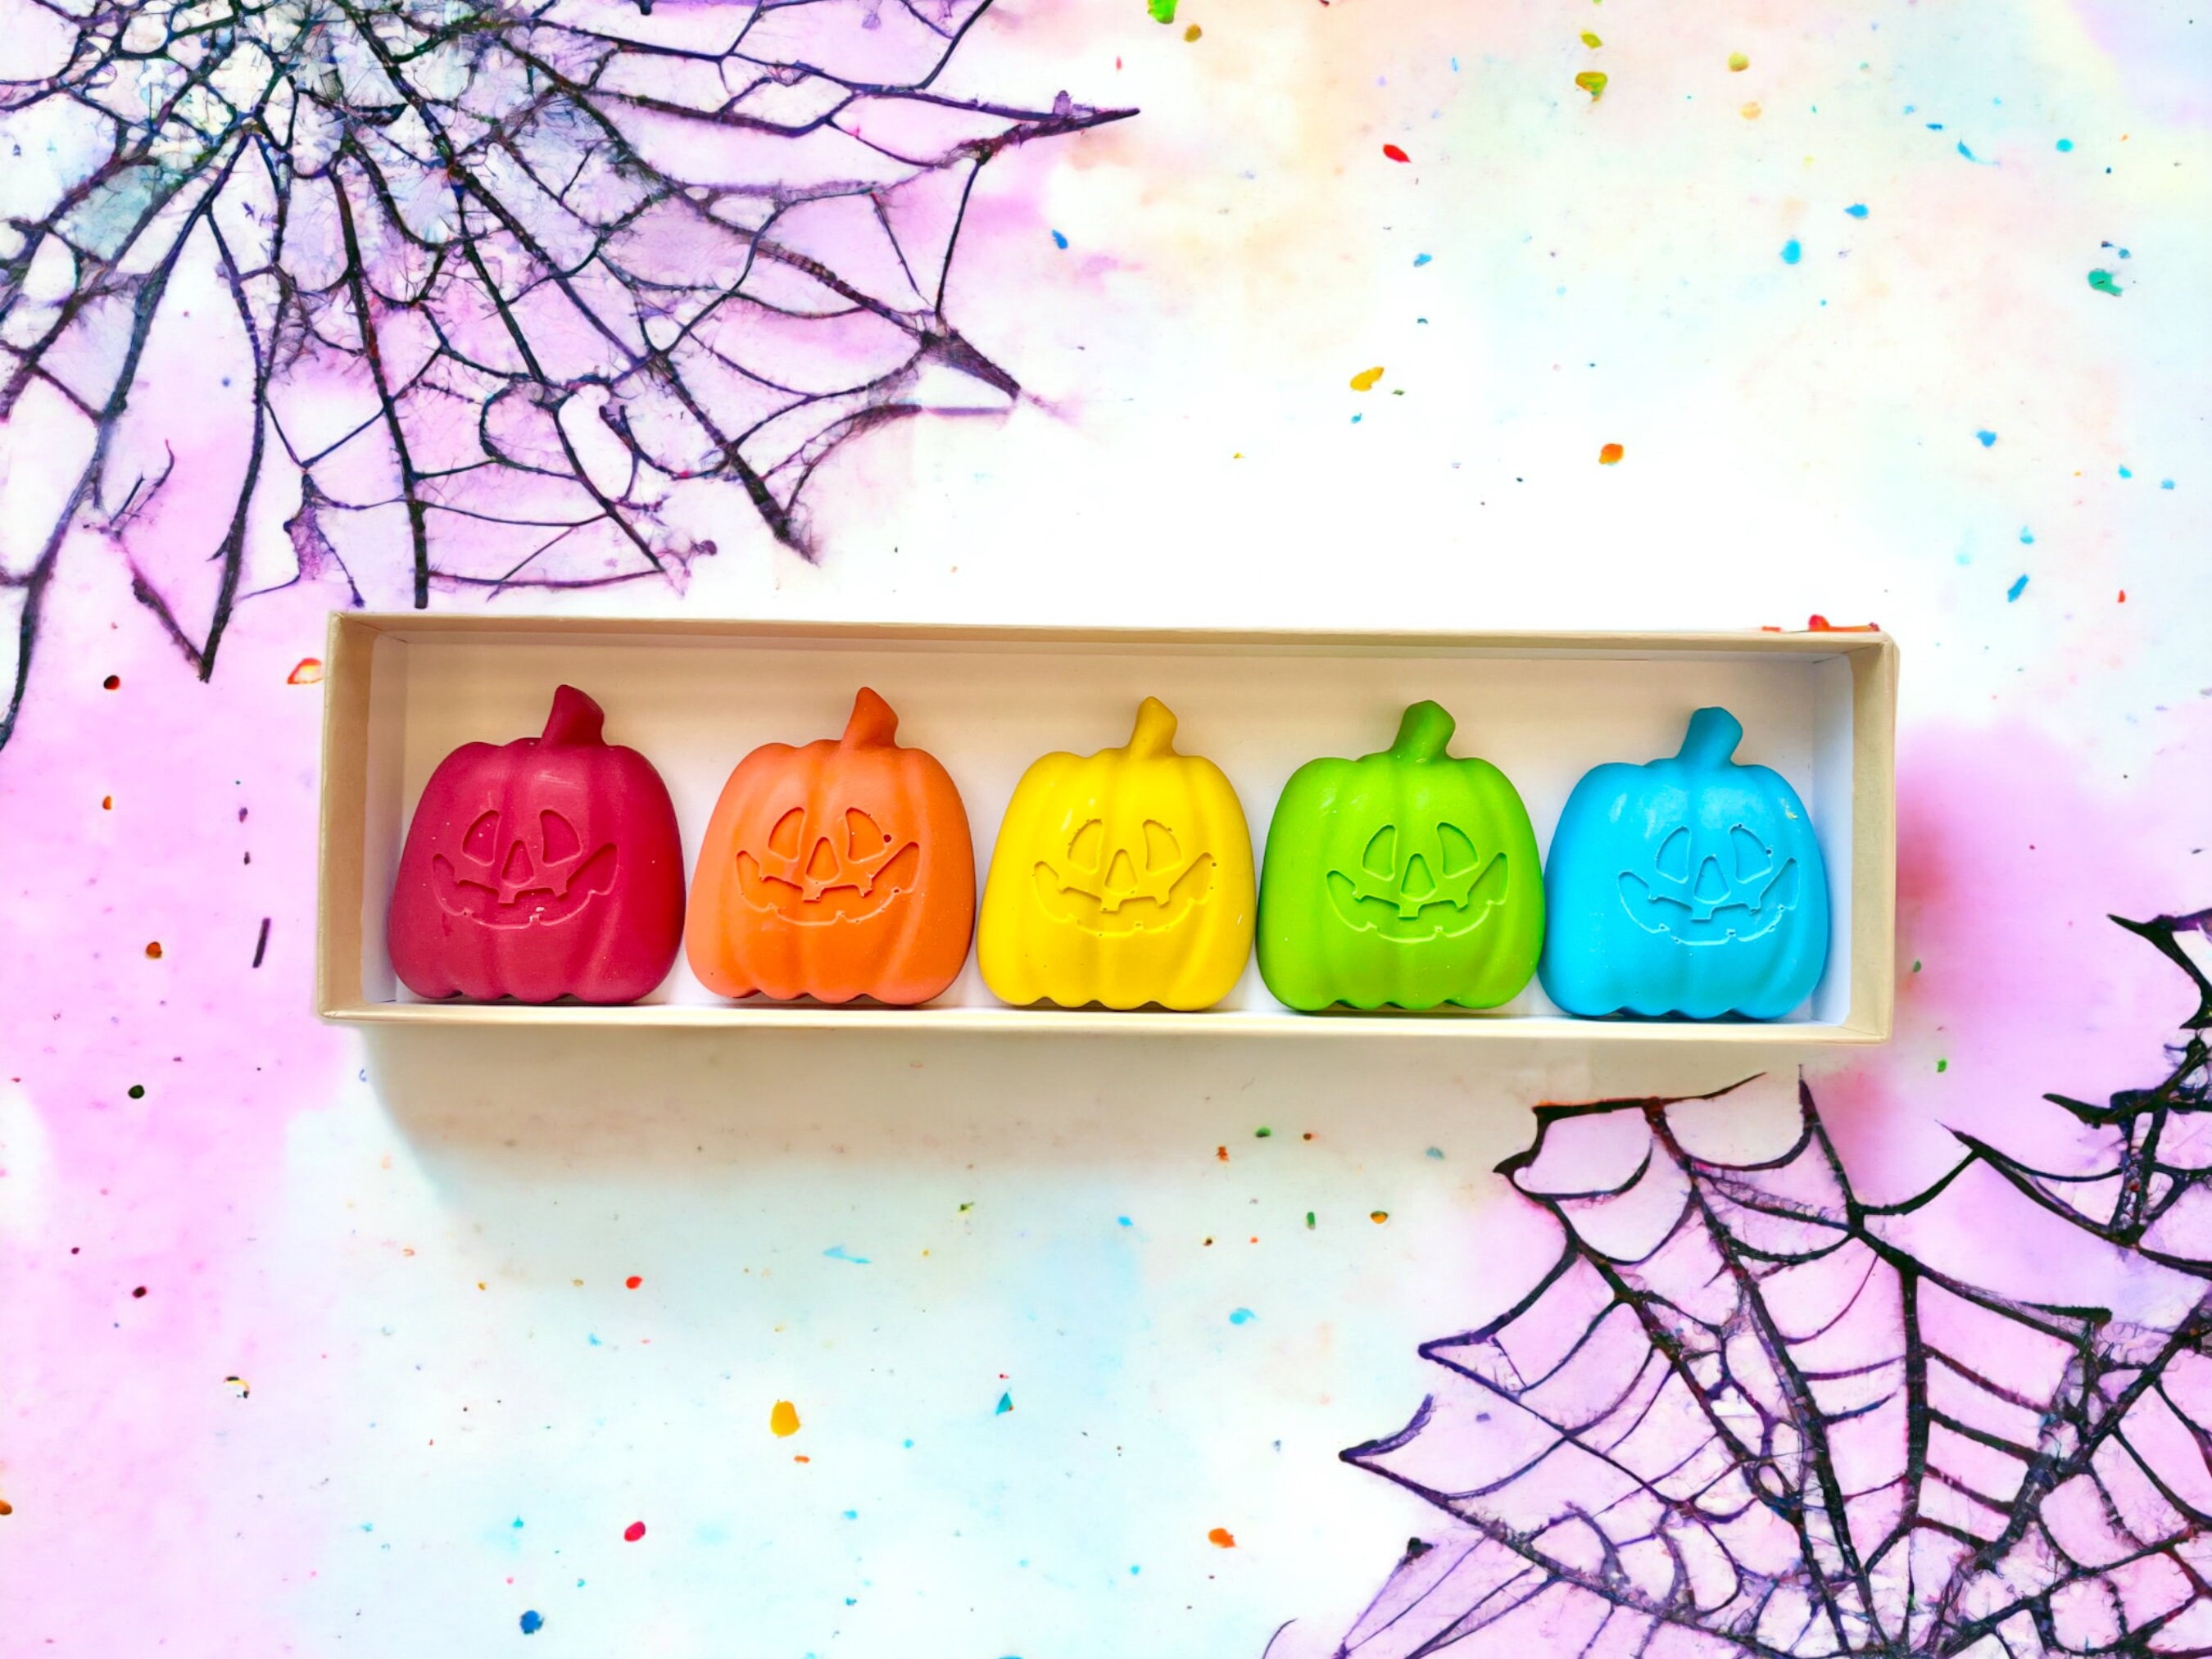 Halloween Pumpkin crayons set of 40 - Halloween Party Favors - Halloween  Treats - Halloween - Shaped Crayons - Kids Gifts - Gifts For Kids by  KagesKrayons